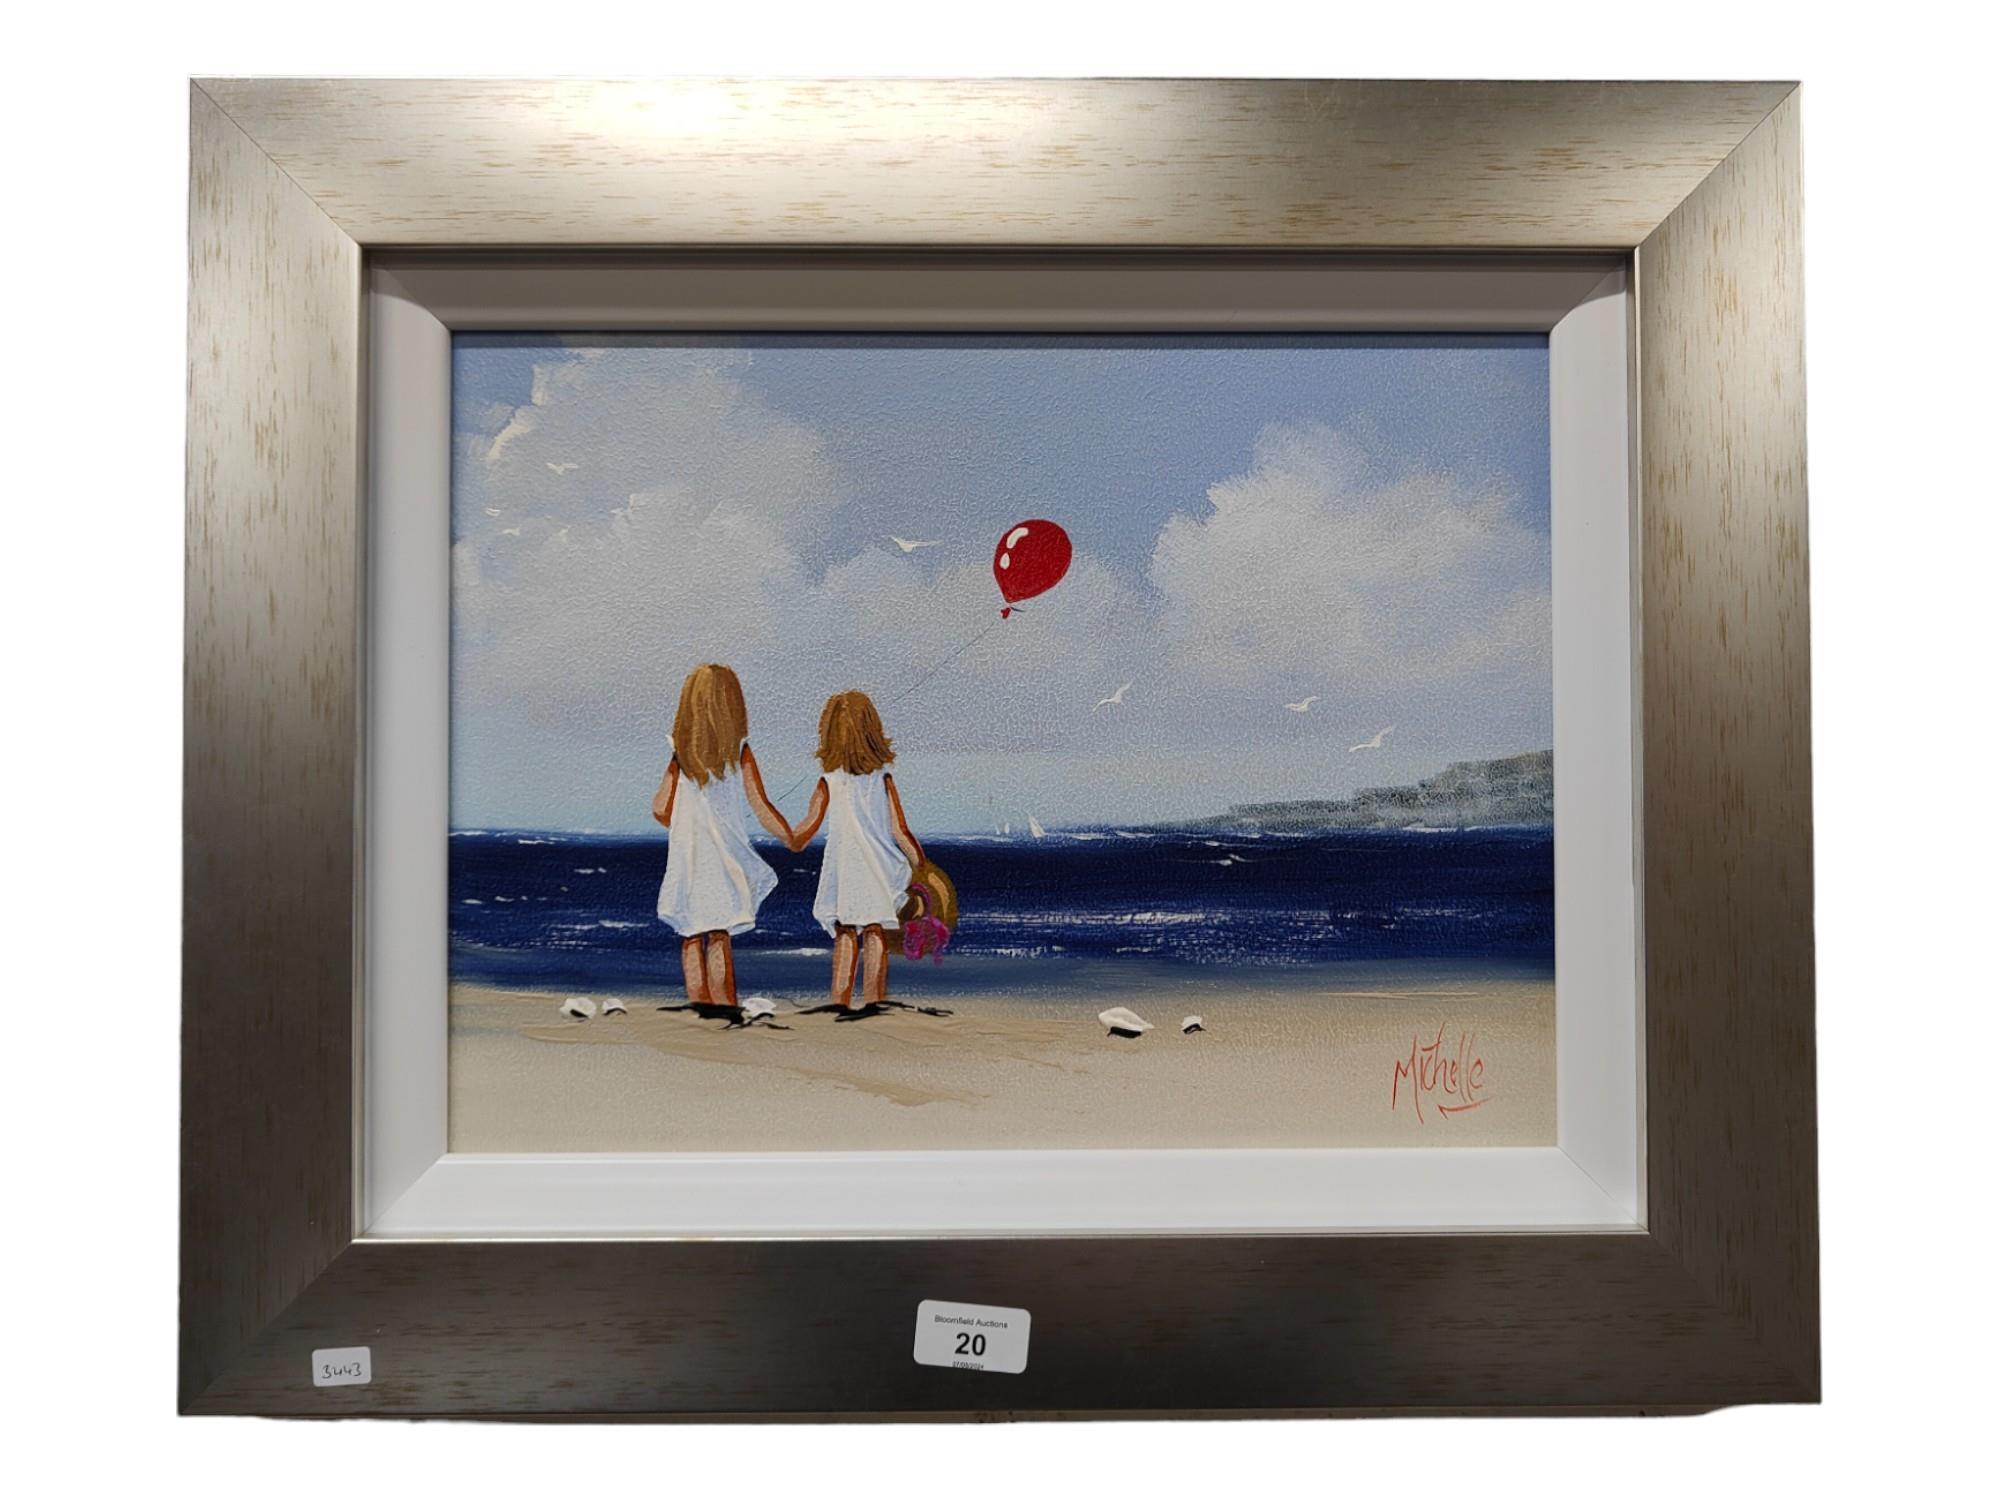 MICHELLE - OIL ON BOARD - THE RED BALLOON 41CM X 30CM